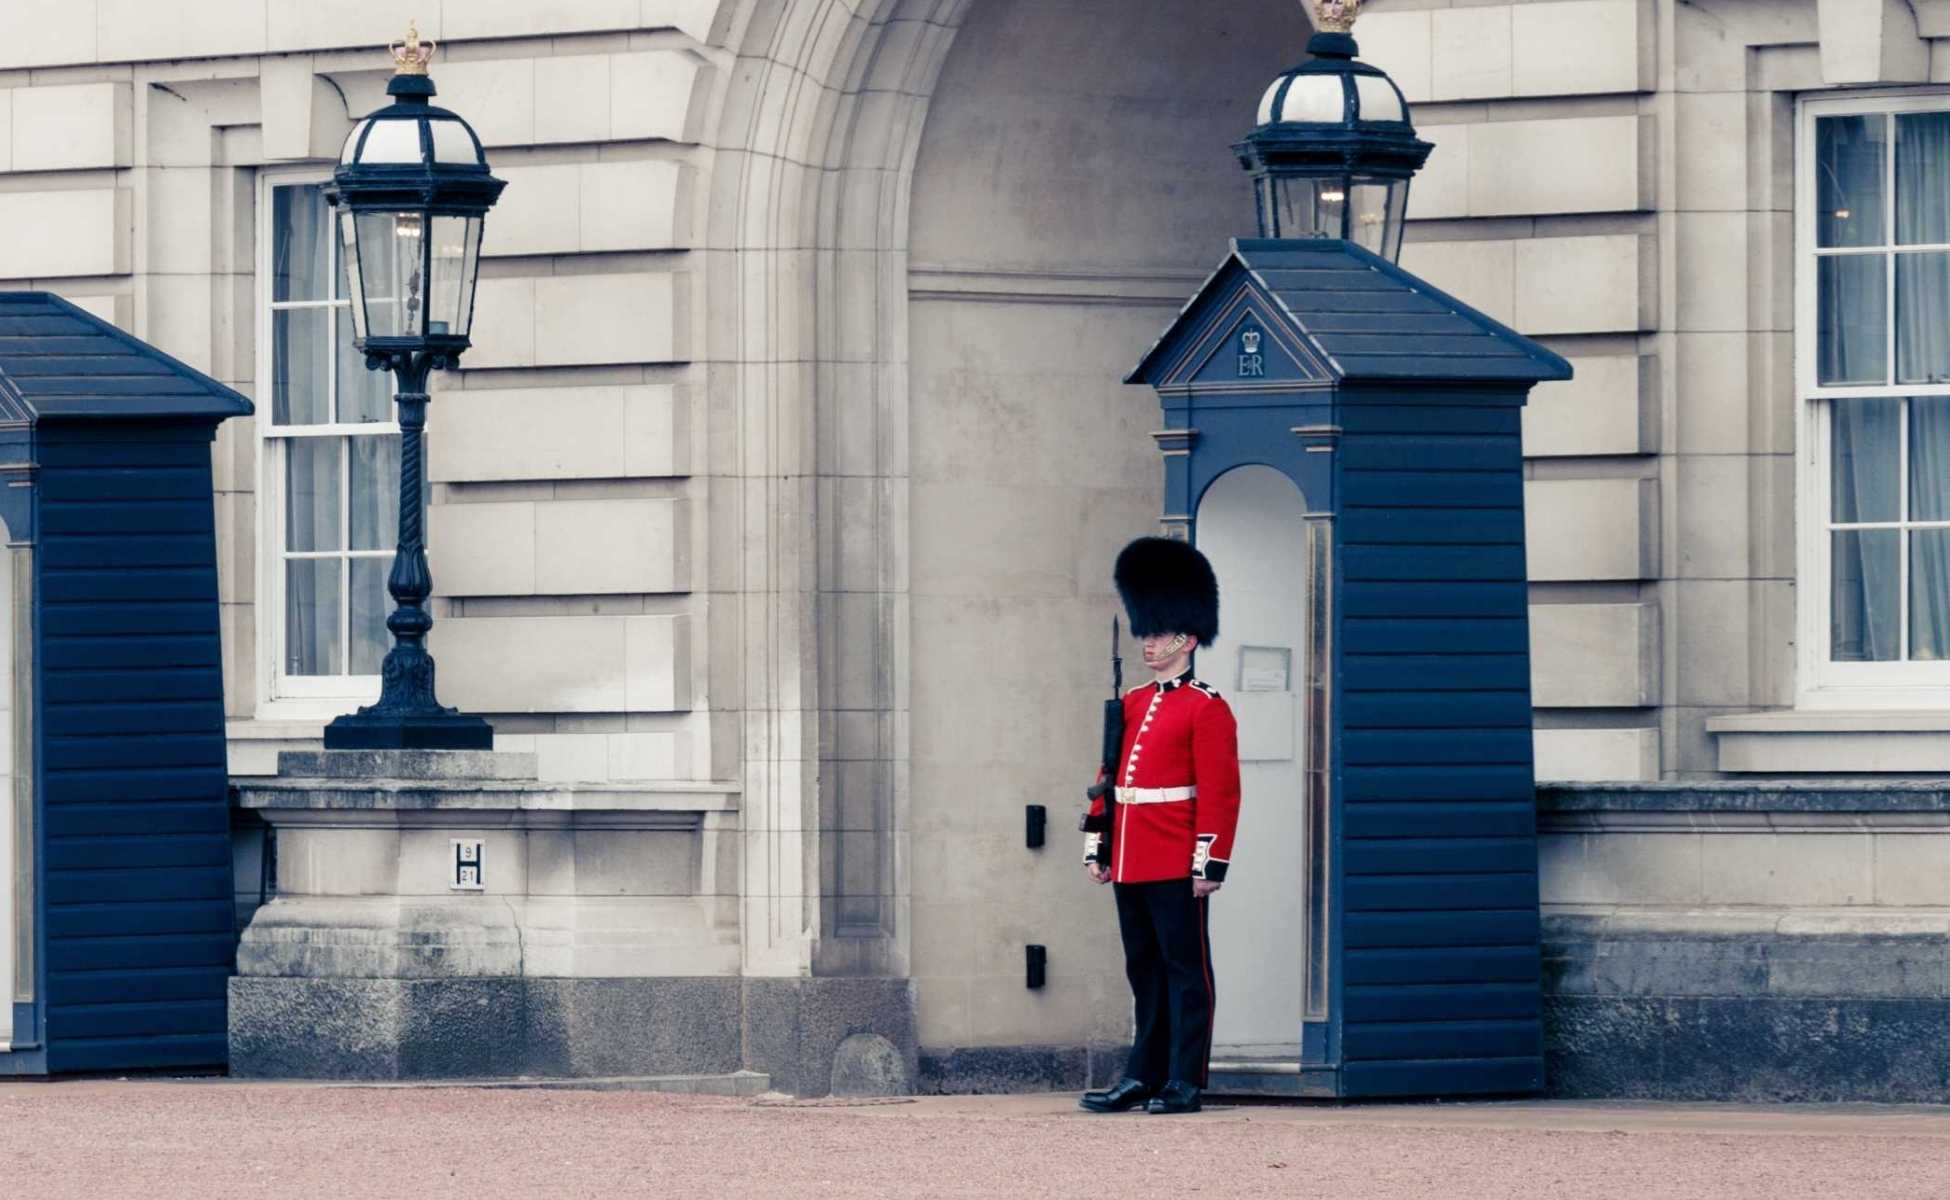 Palace guard - Supporting grieving young people after death of Queen - patrick-robert-doyle-0ji5tjZQ2l4-unsplash